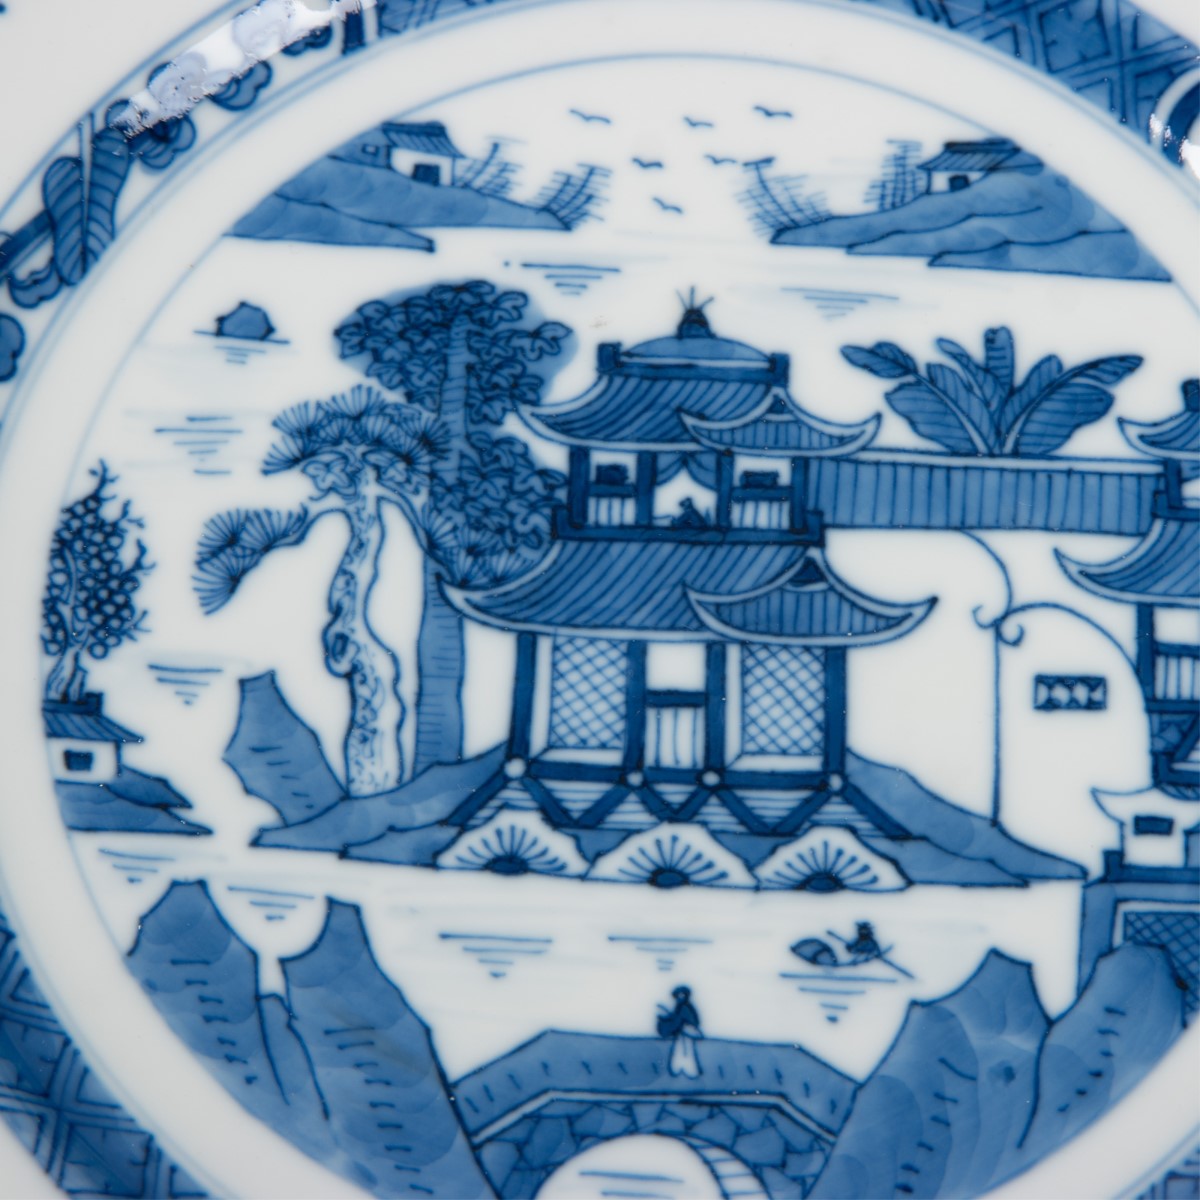 GROUP OF 13 CHINESE BLUE AND WHITE DISHES - Image 4 of 6